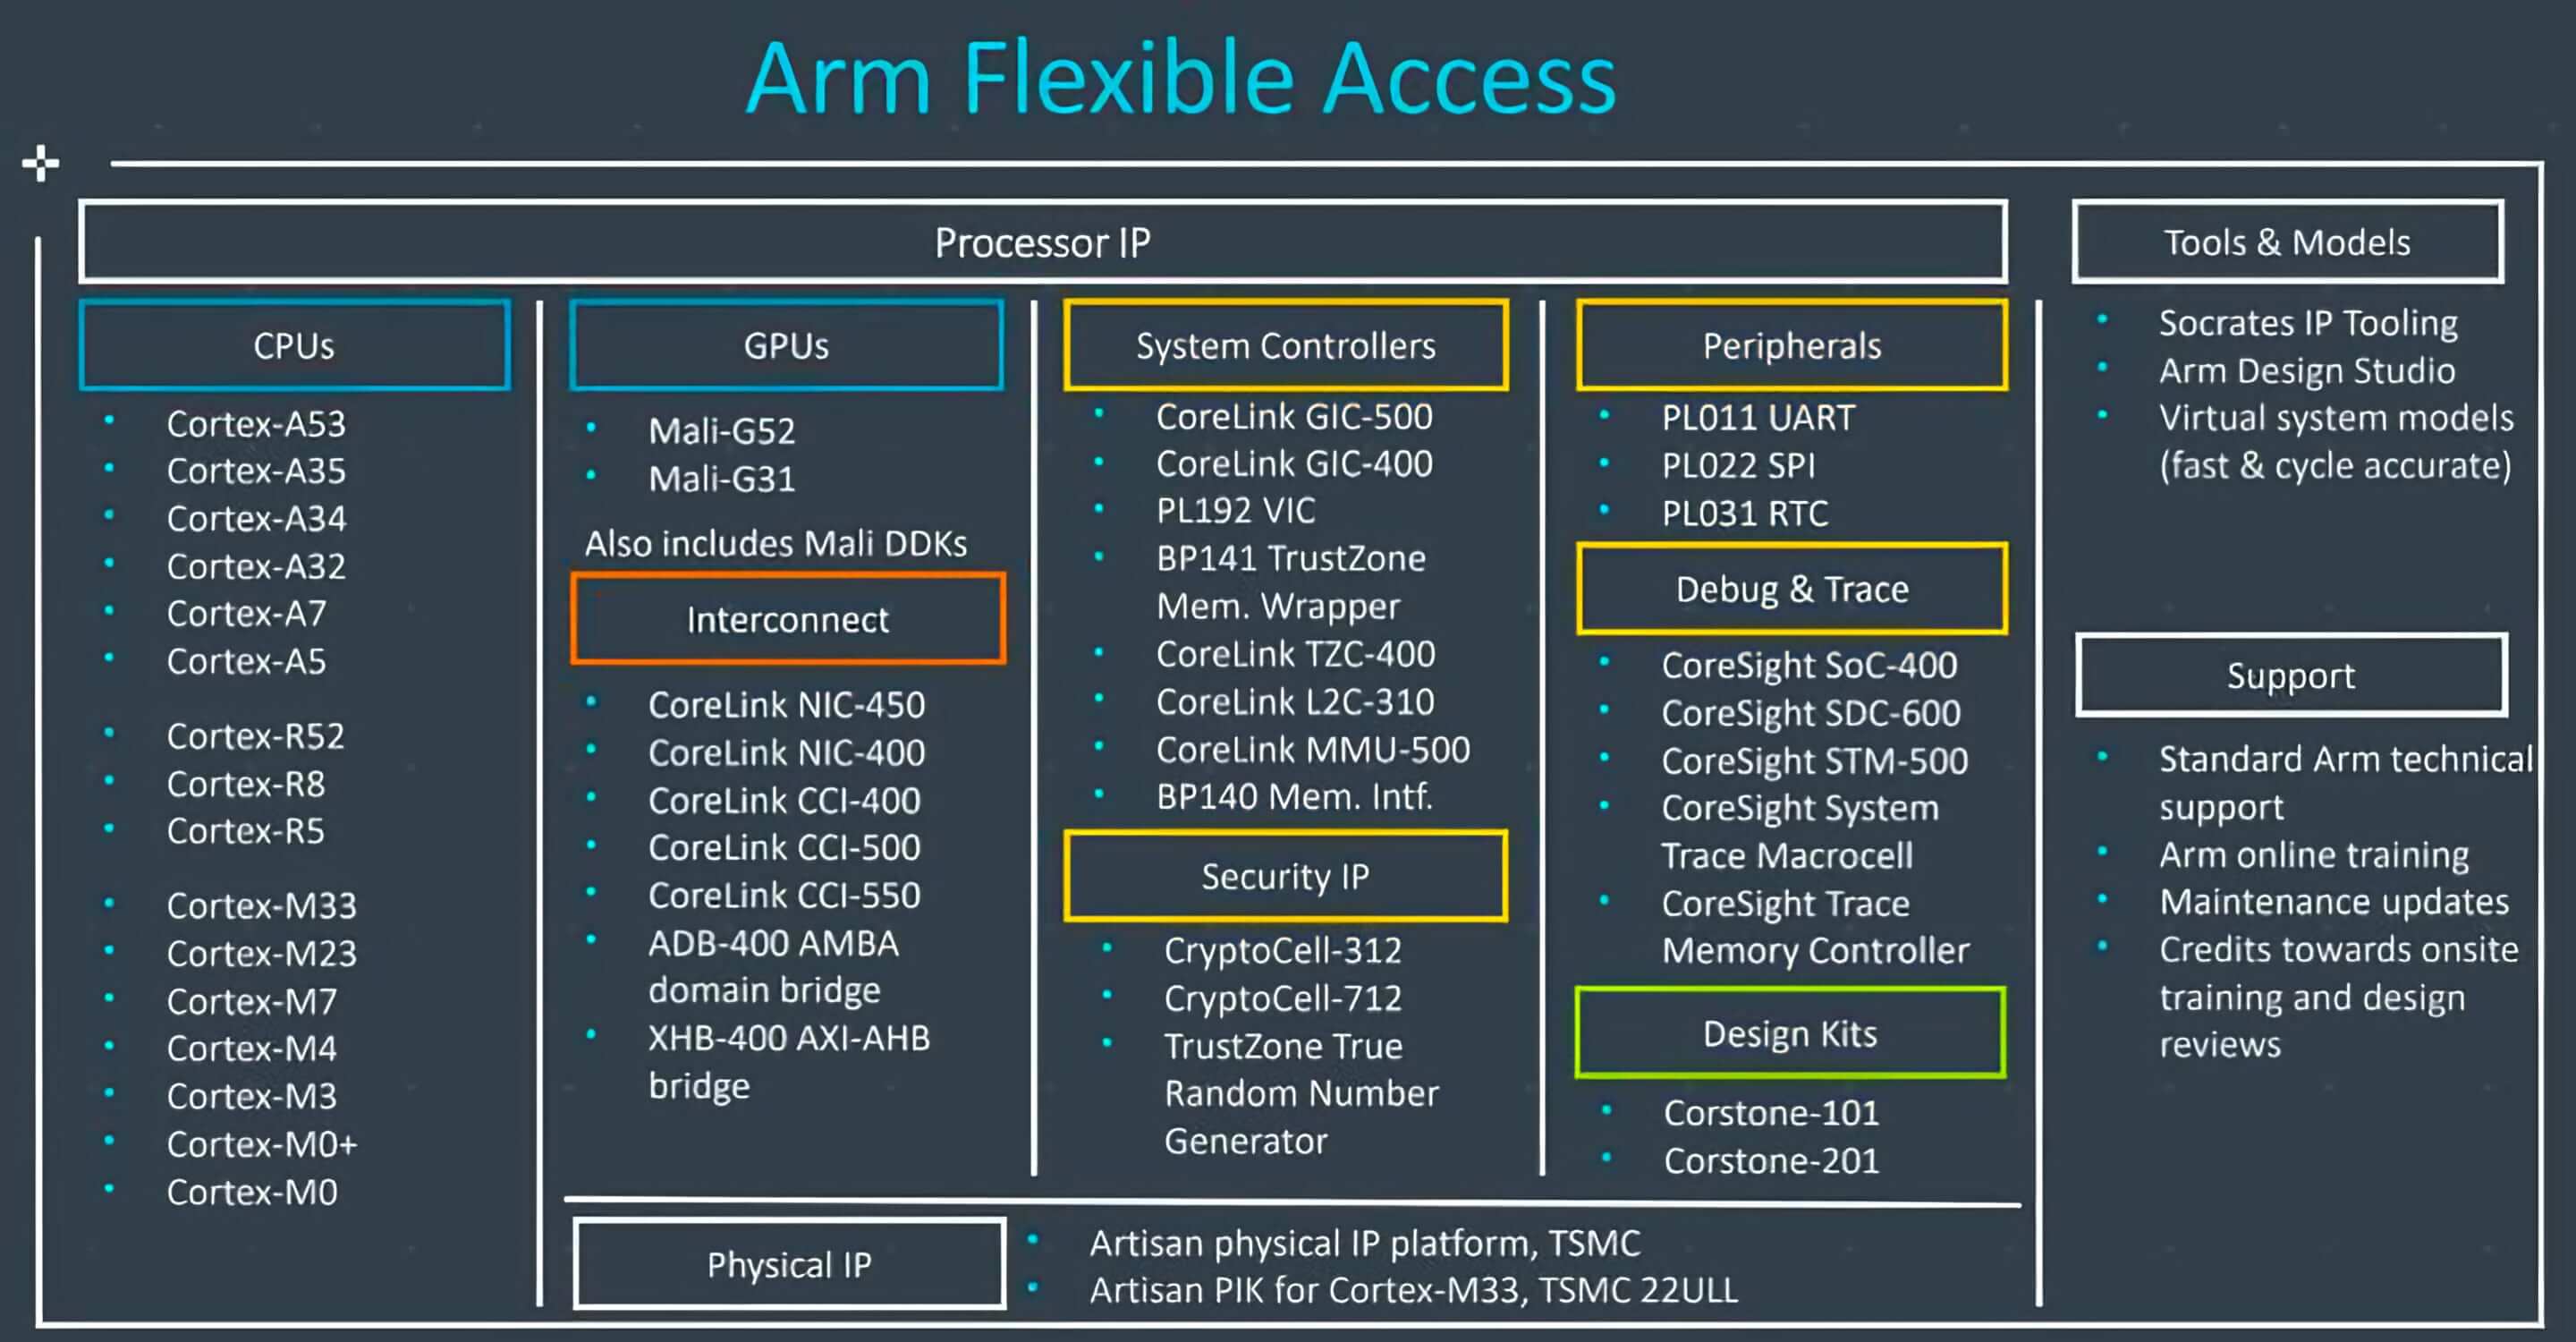 Zwembad Seminarie Plasticiteit How Arm Came to Dominate the Mobile Market | TechSpot